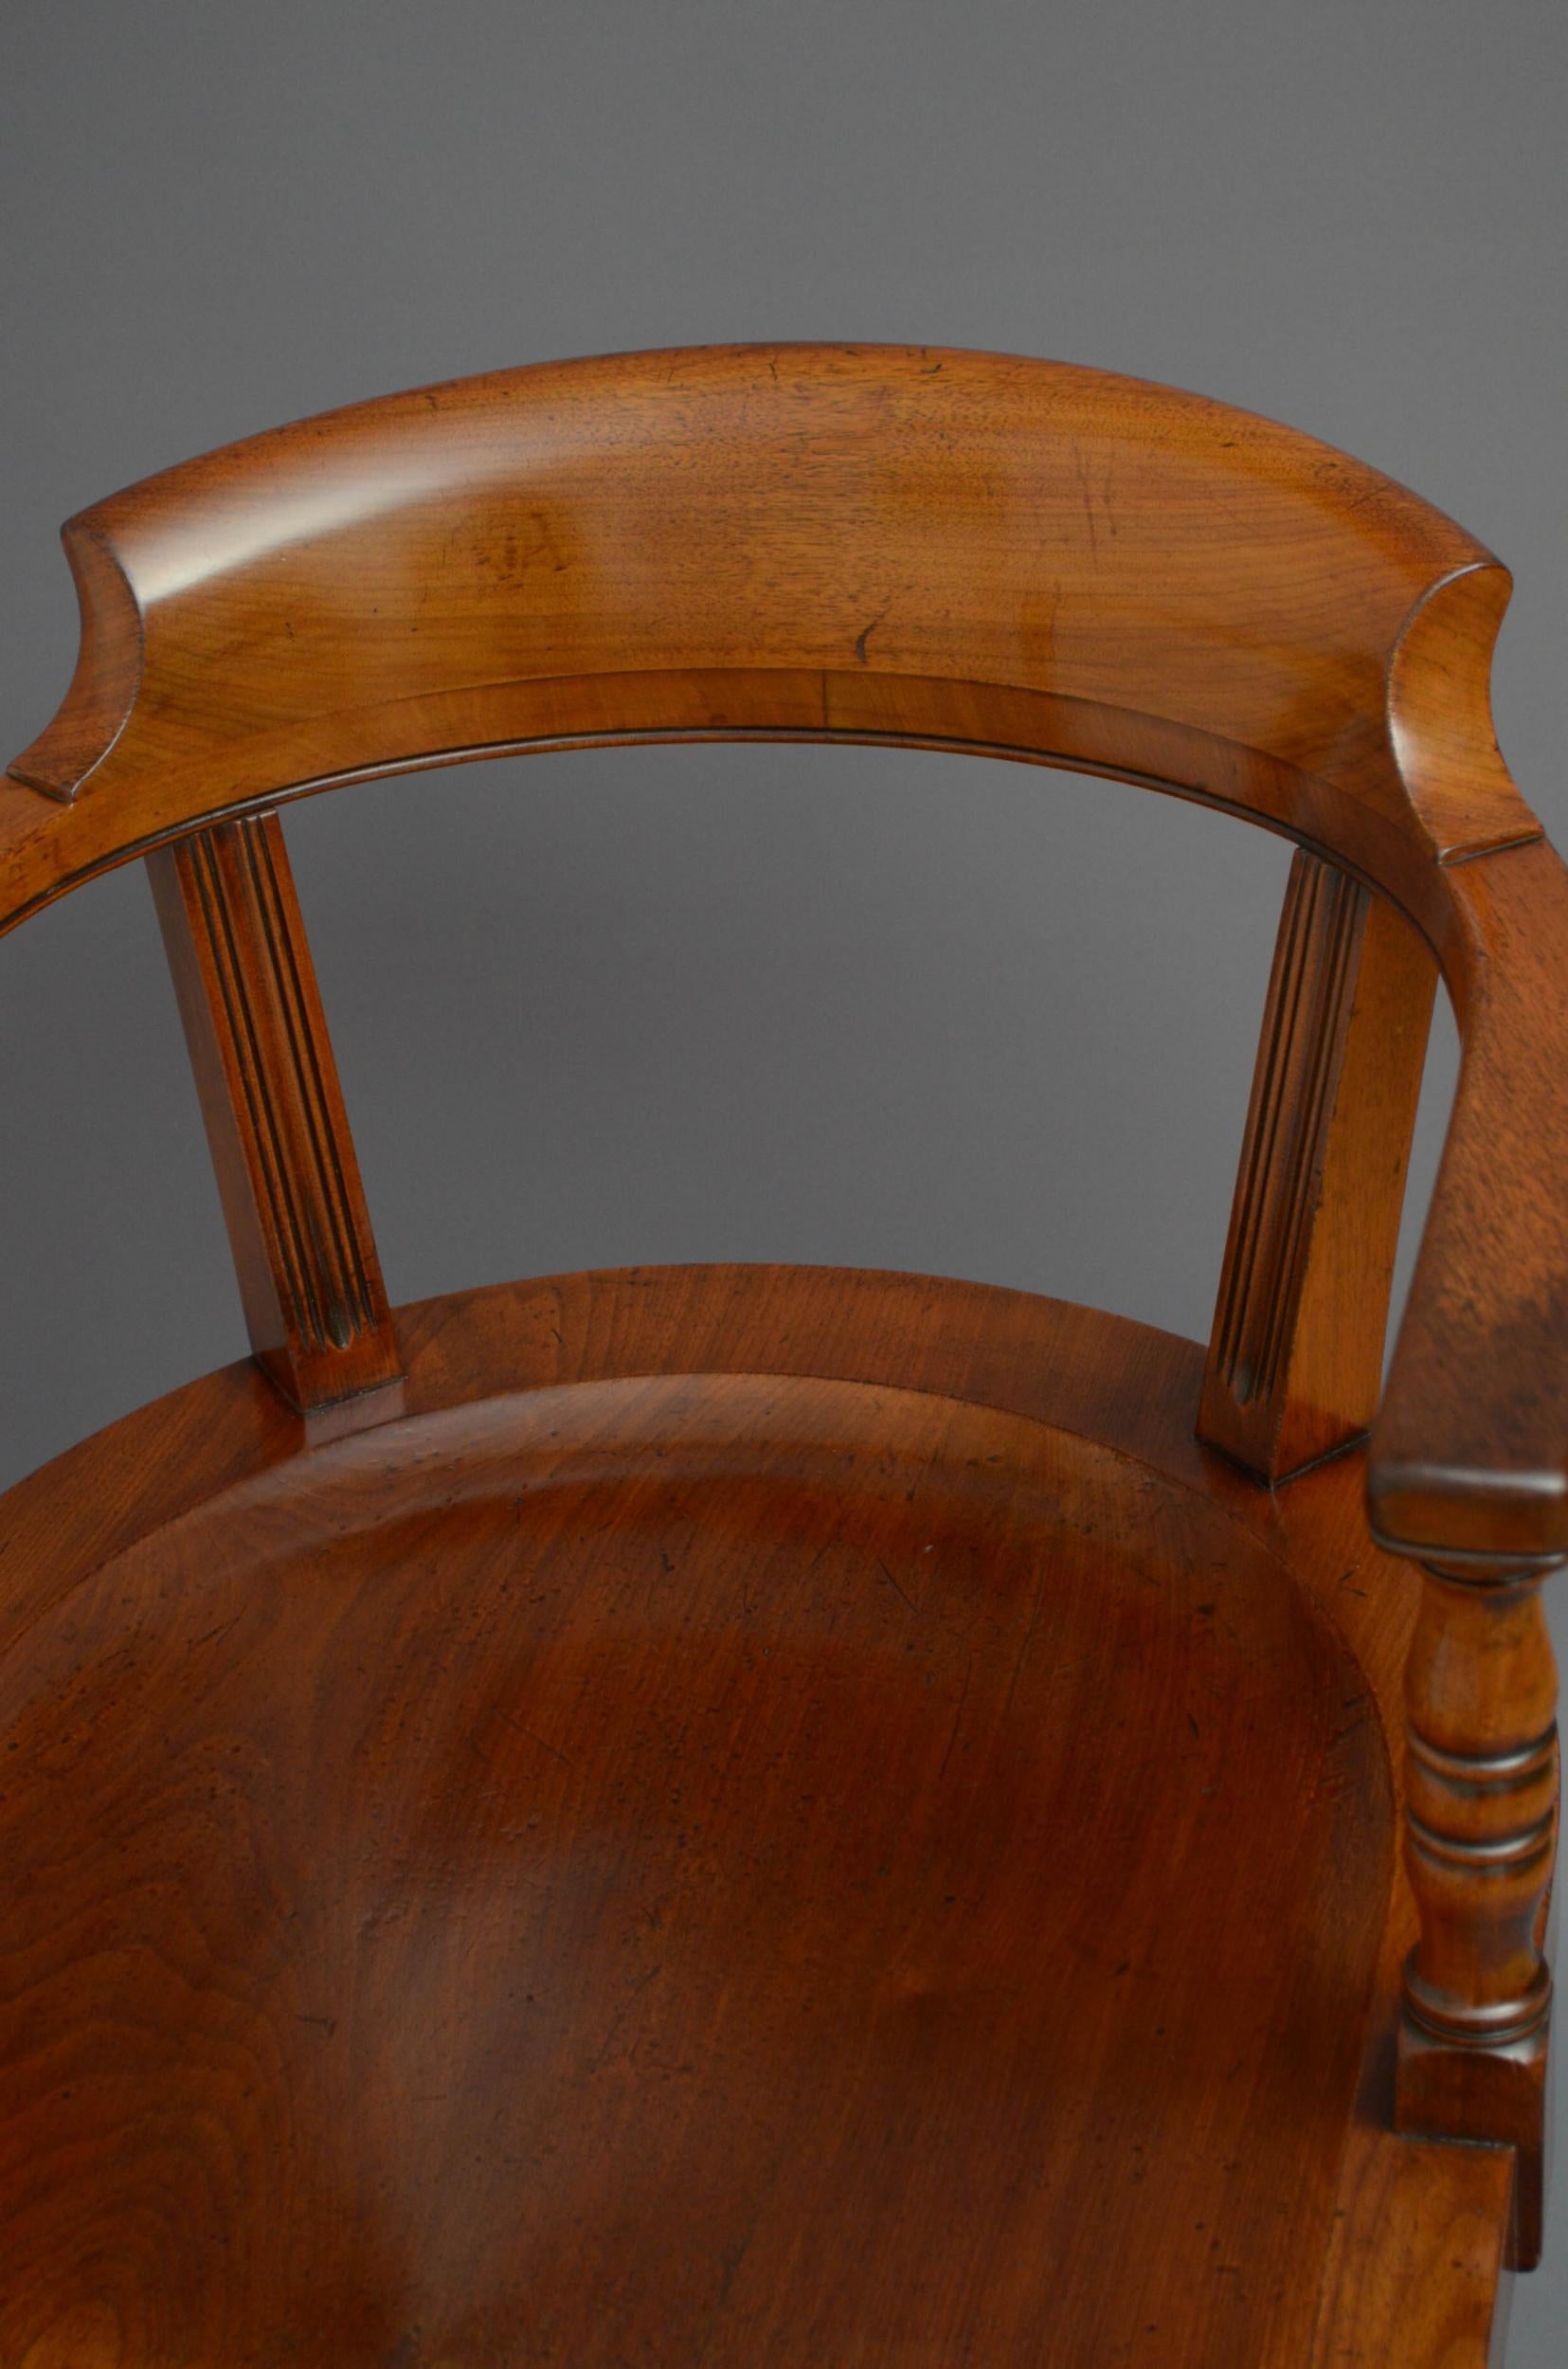 19th Century Turner, Son & Walker Late Victorian Desk or Library Chair